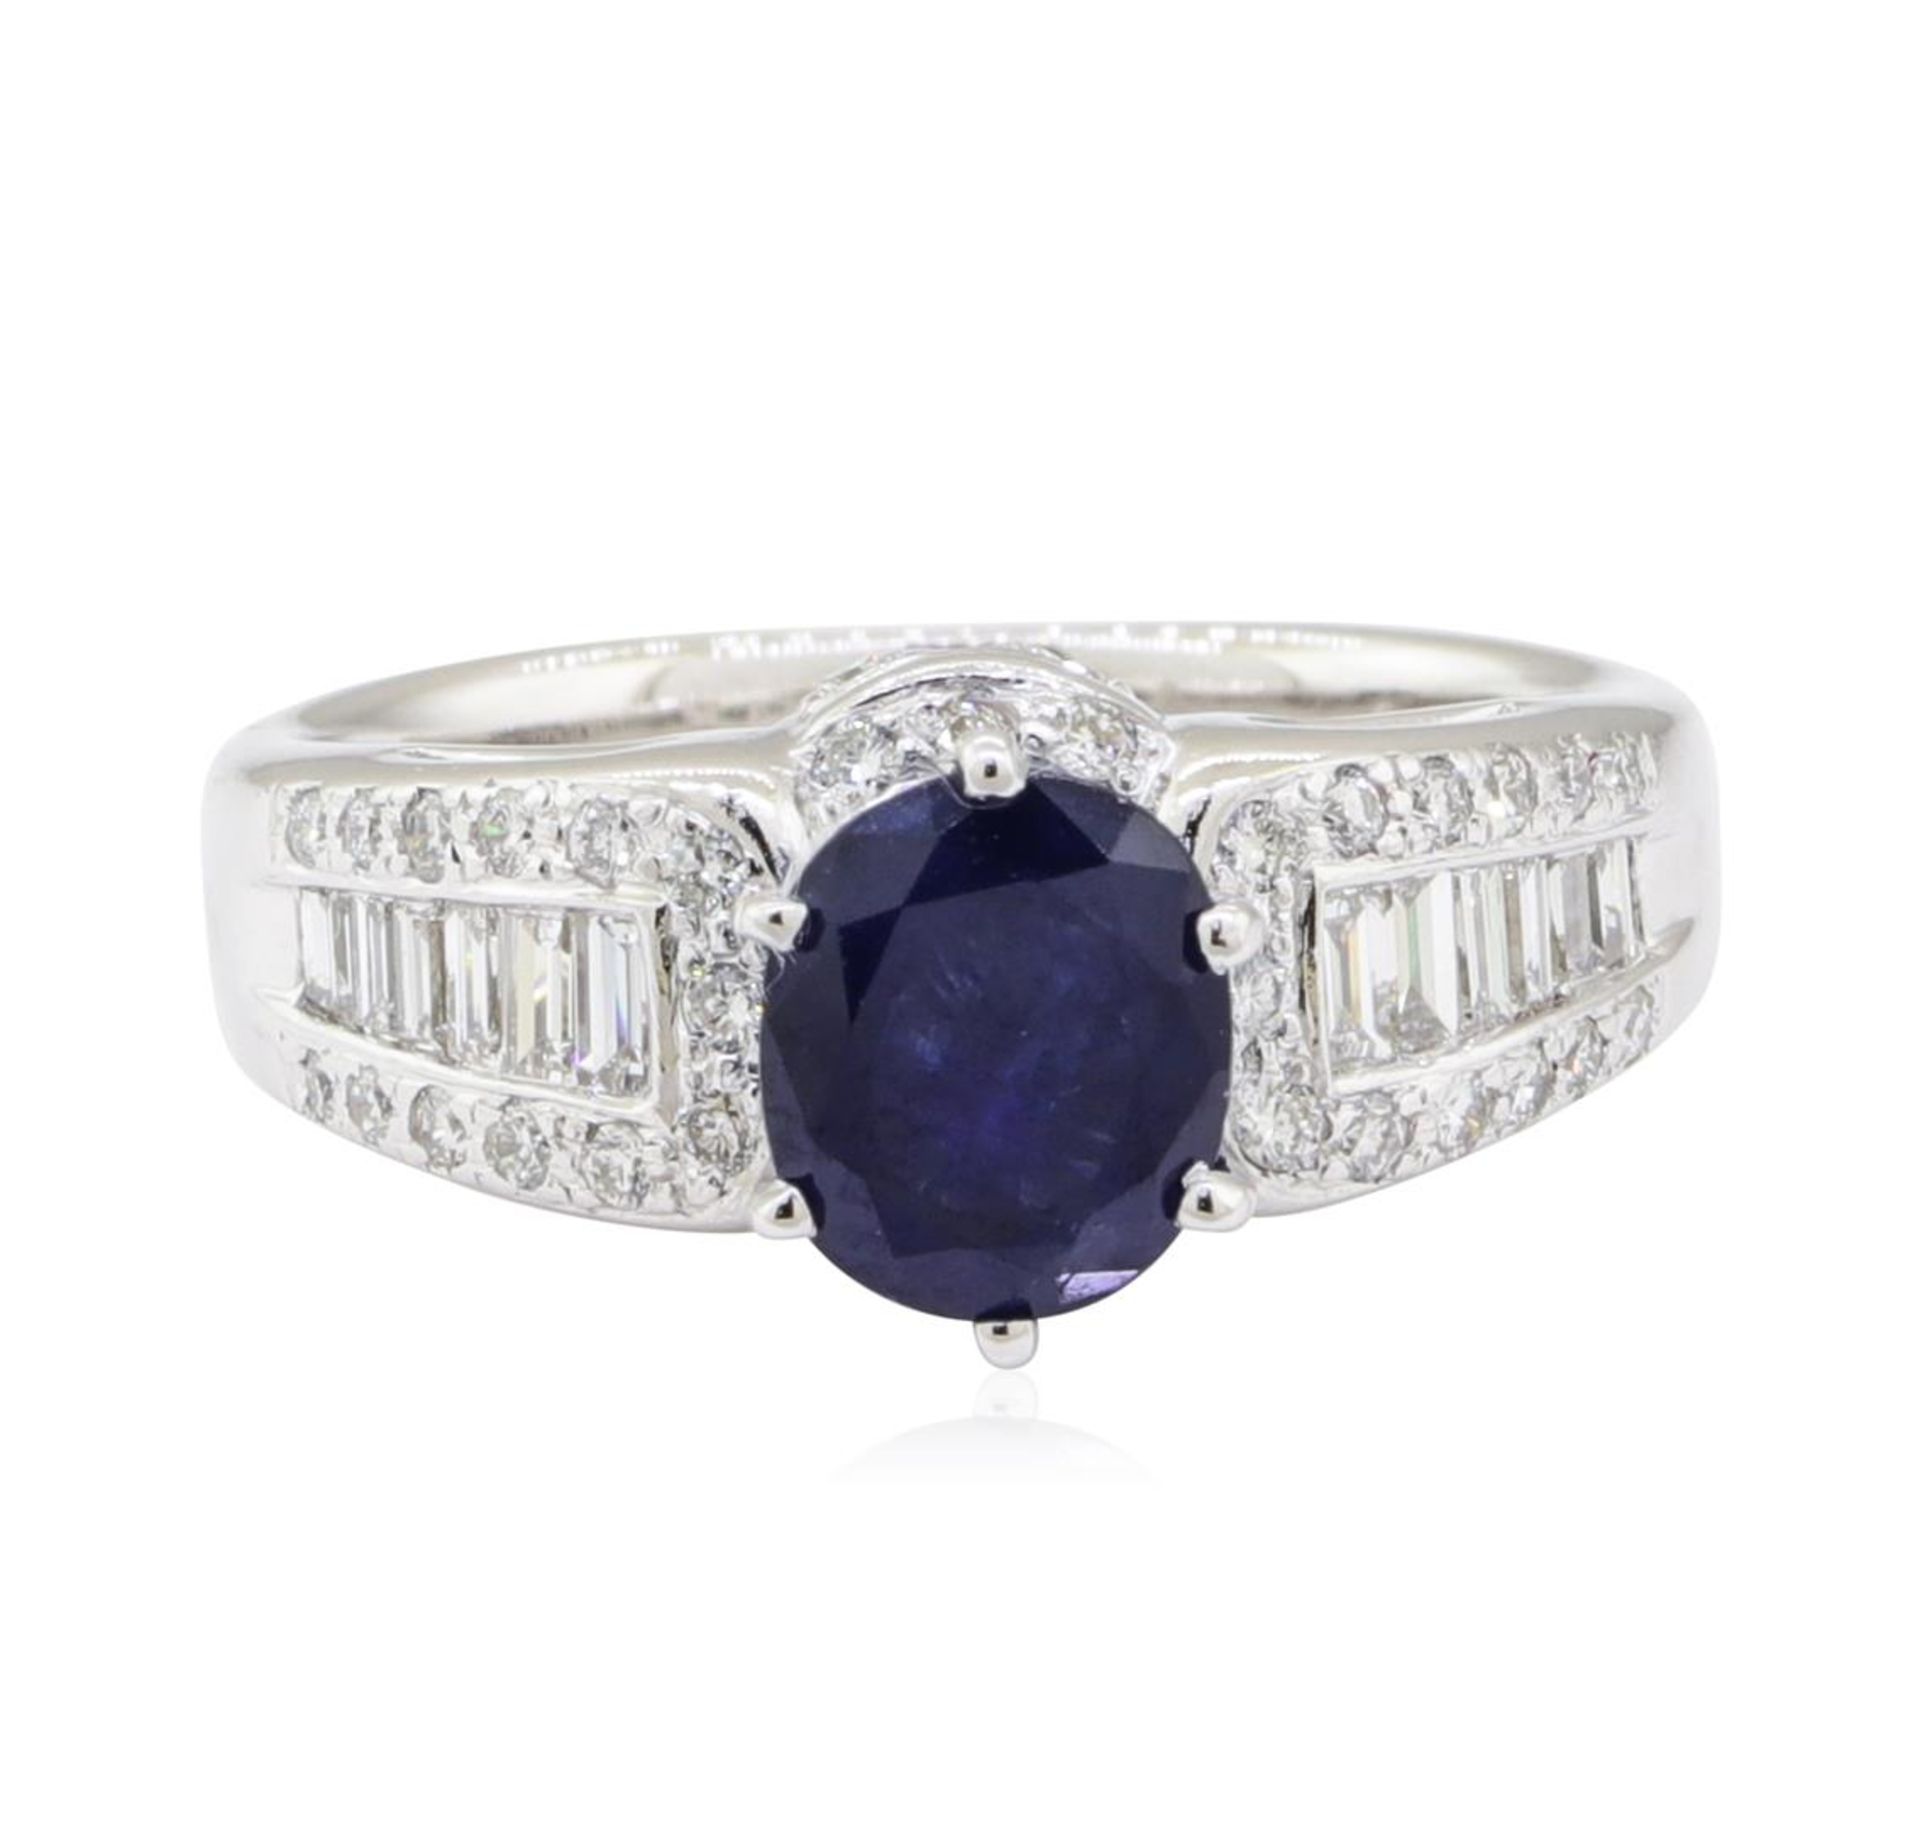 2.01 ctw Sapphire and Diamond Ring - 14KT White Gold - Image 4 of 10